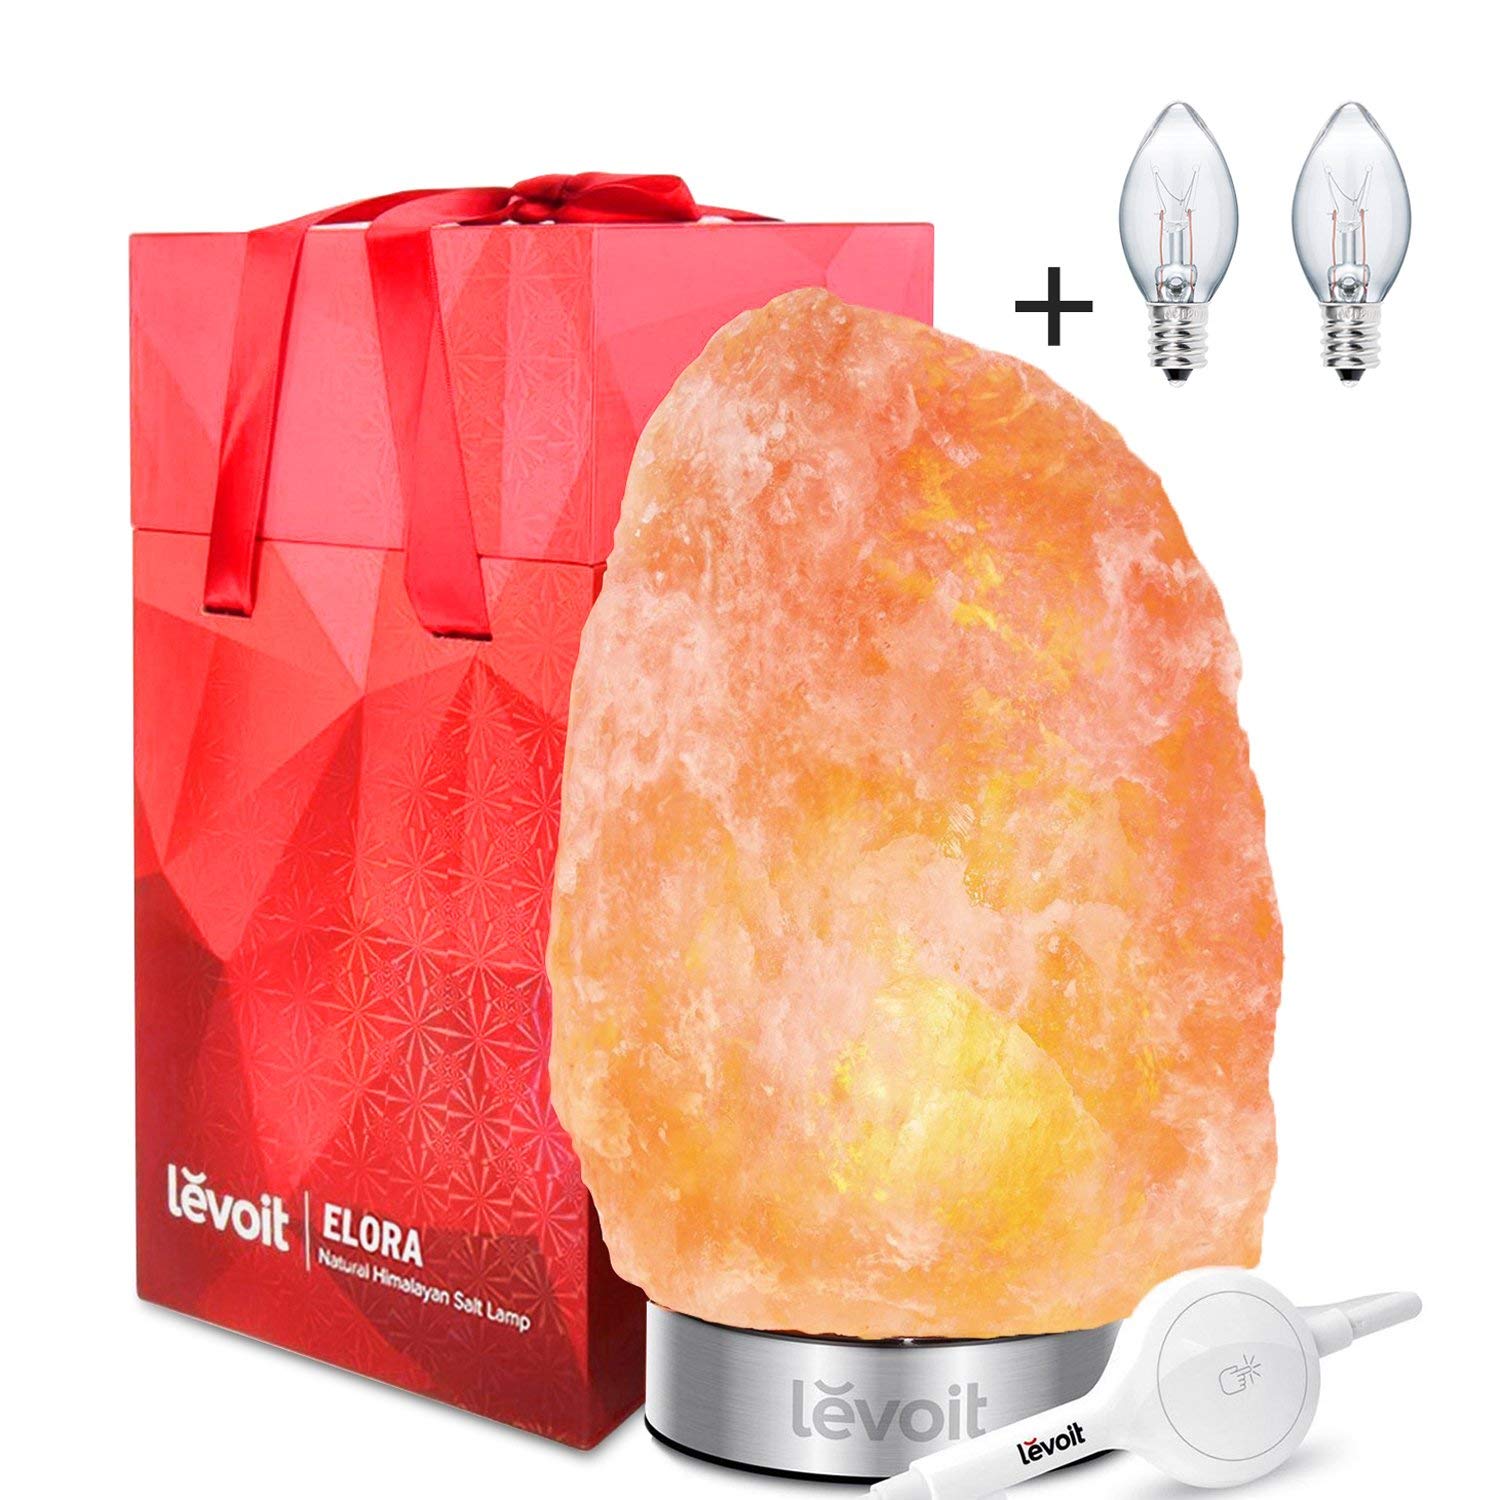 Levoit Elora Large Salt Lamp Pink Crystal Hand Carved Himalayan Salt Lamps with 18/8 Stainless Steel Base, Dimmable Touch Switch, Luxury Gift Box(UL-Listed, 2 Extra Original Bulbs Included)